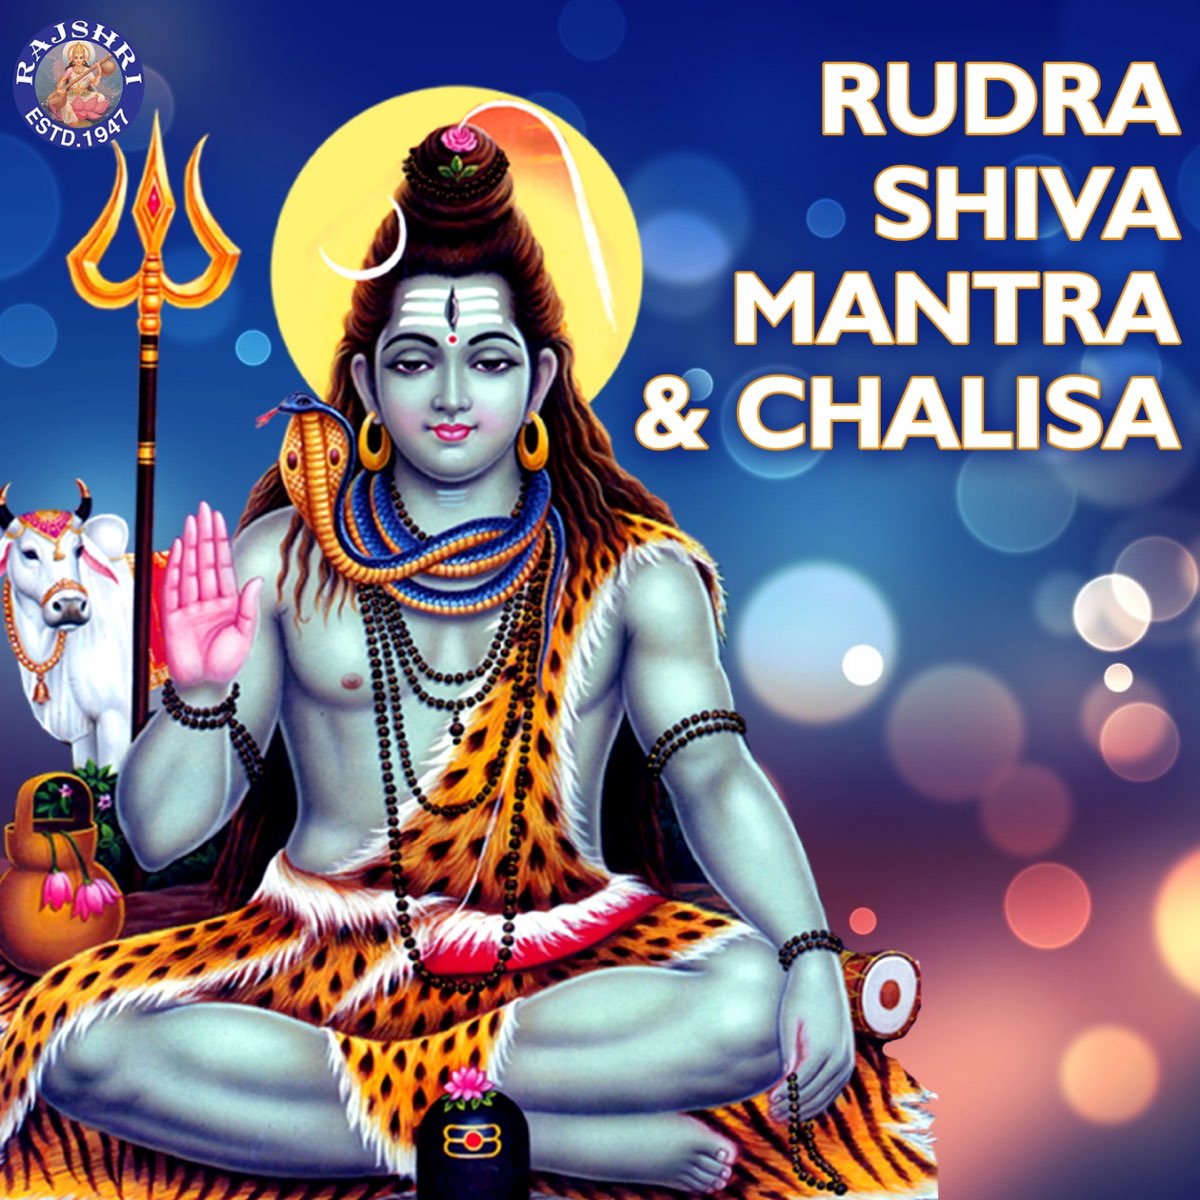 Rudra Shiva Mantra & Chalisa by Various Artists on Apple Music